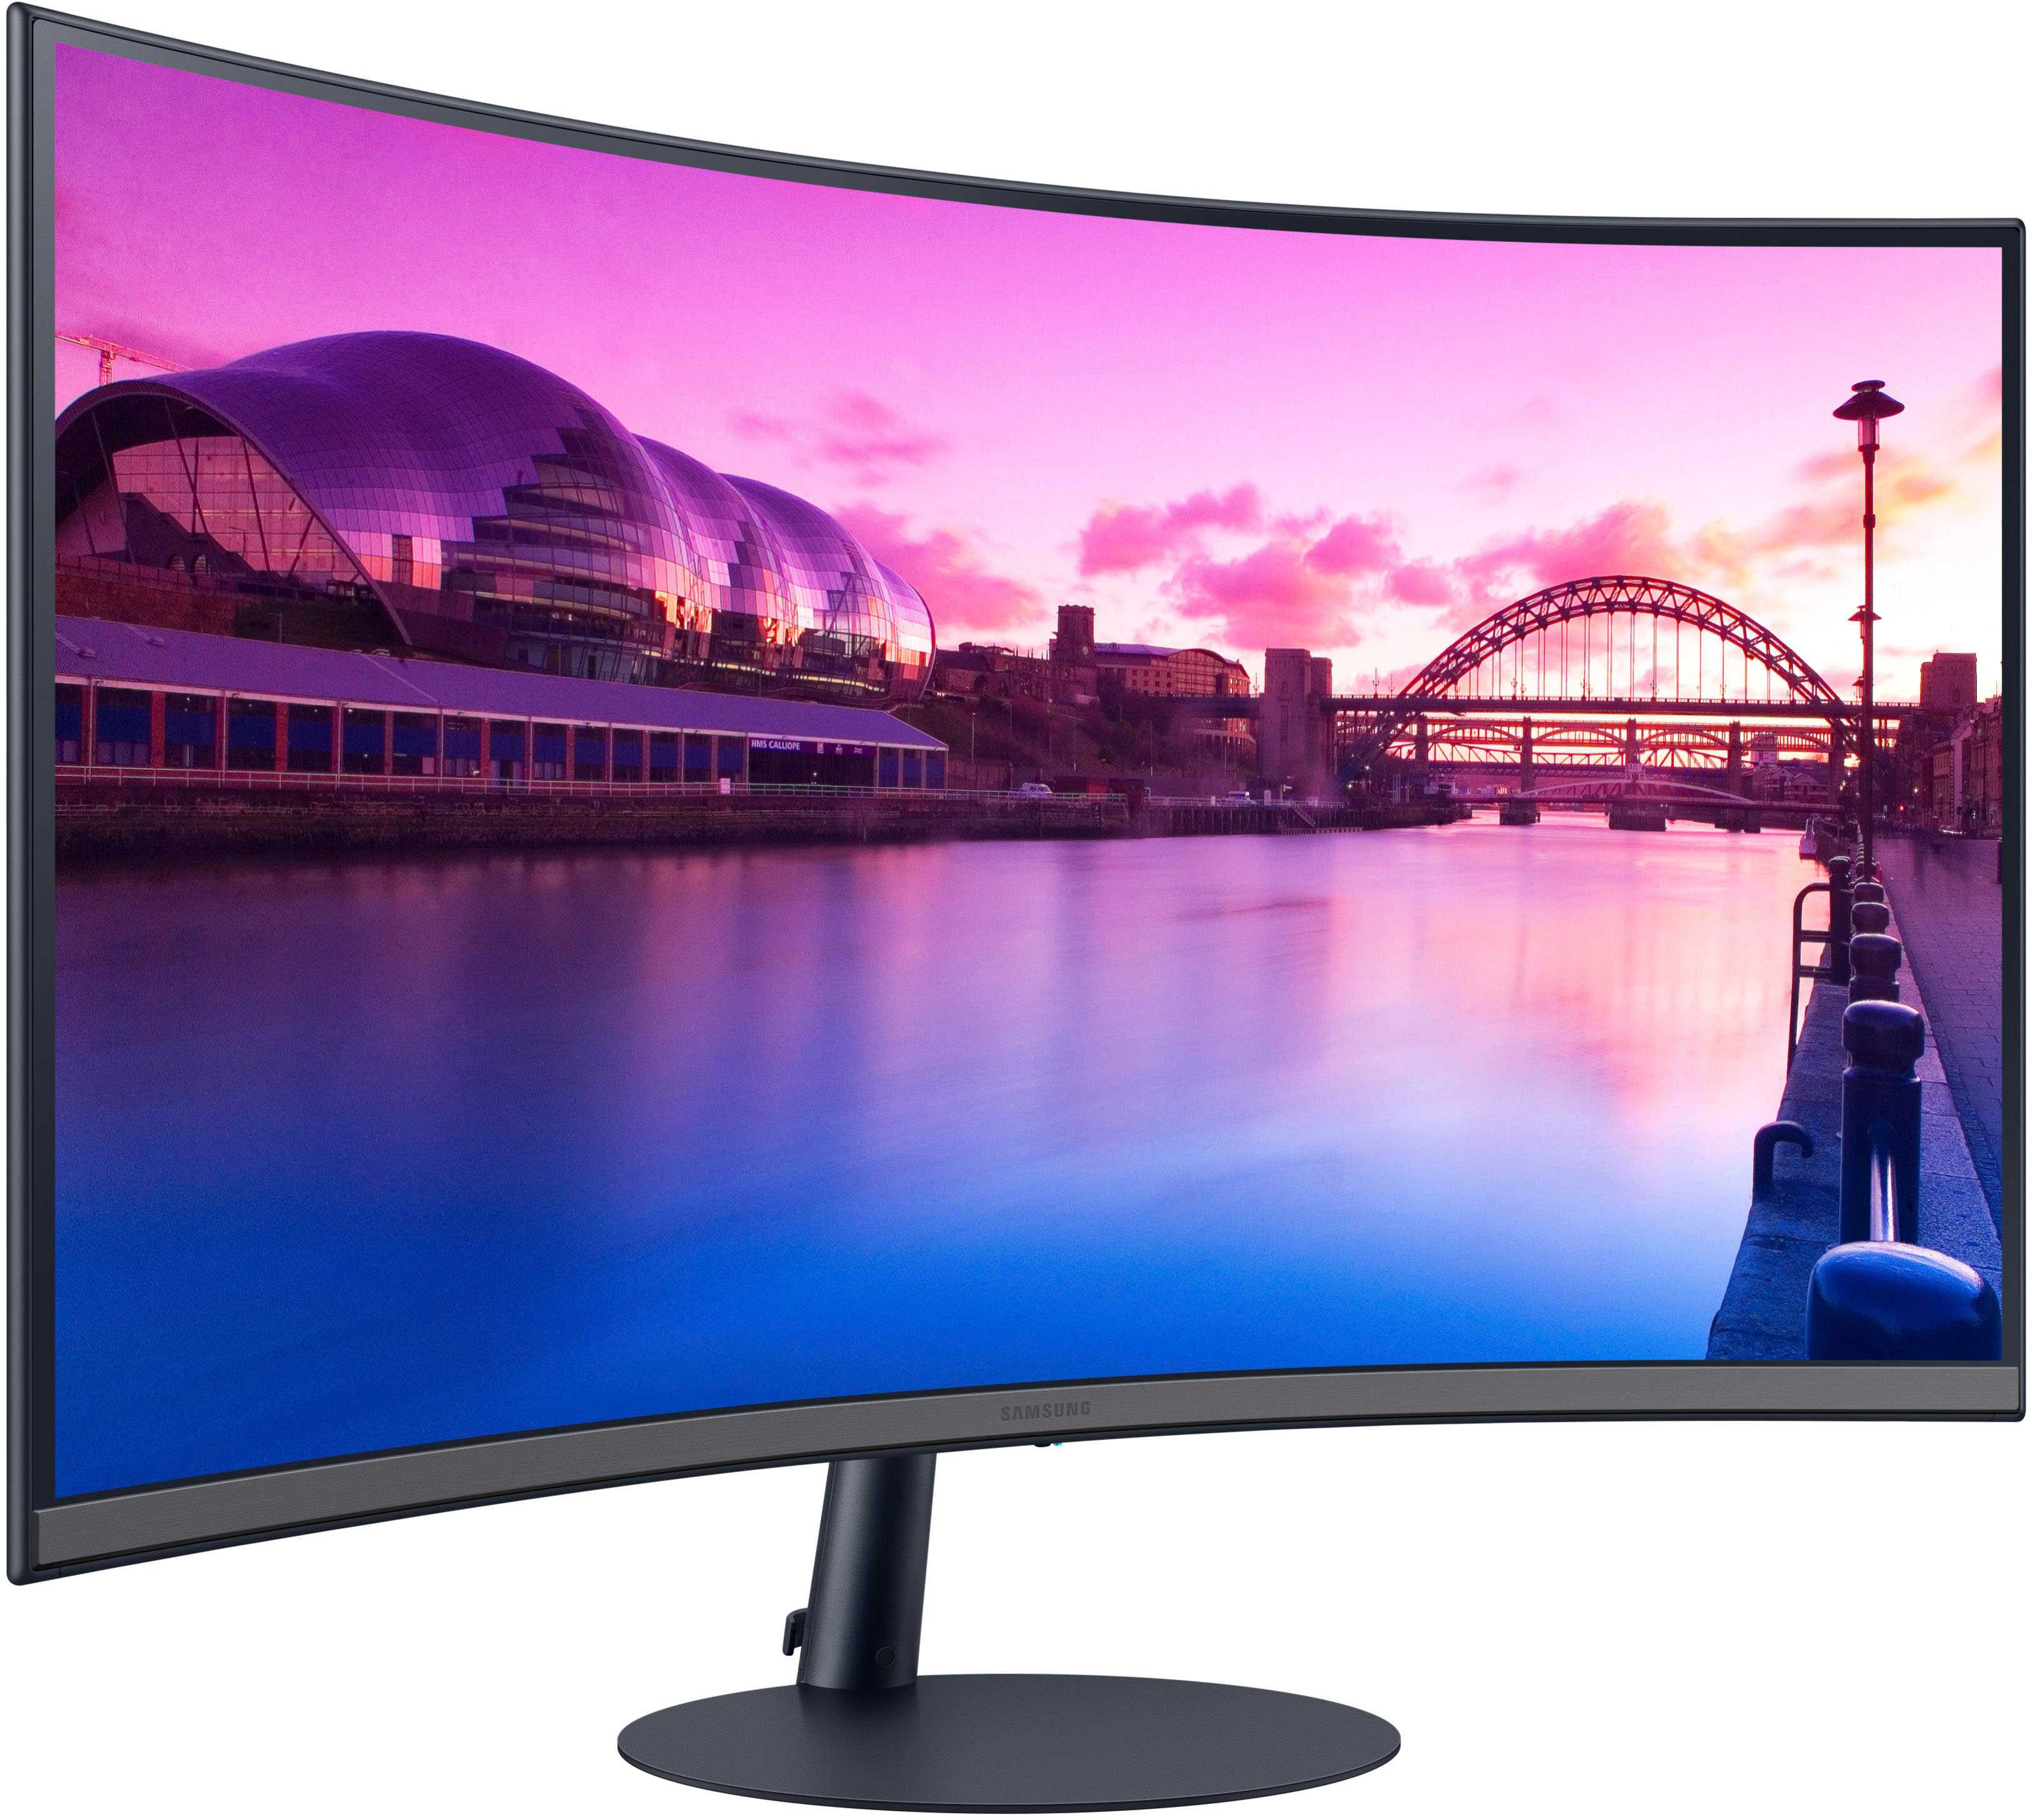 Samsung's curved 32-inch 4K Mini LED monitor goes on sale for $1,500 - The  Verge